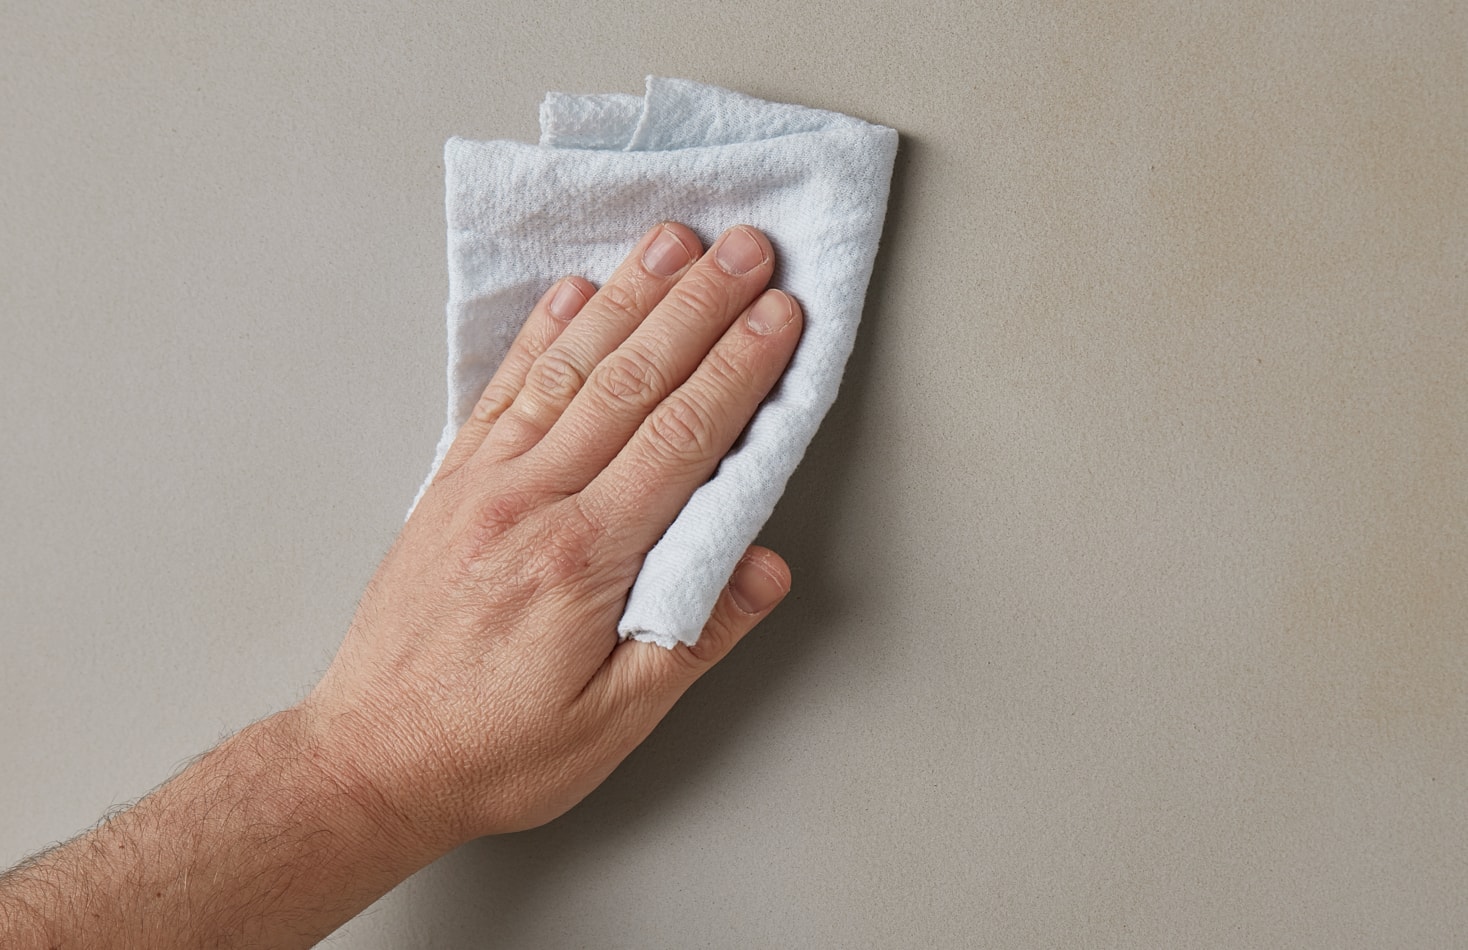 Wiping down walls with damp cloth